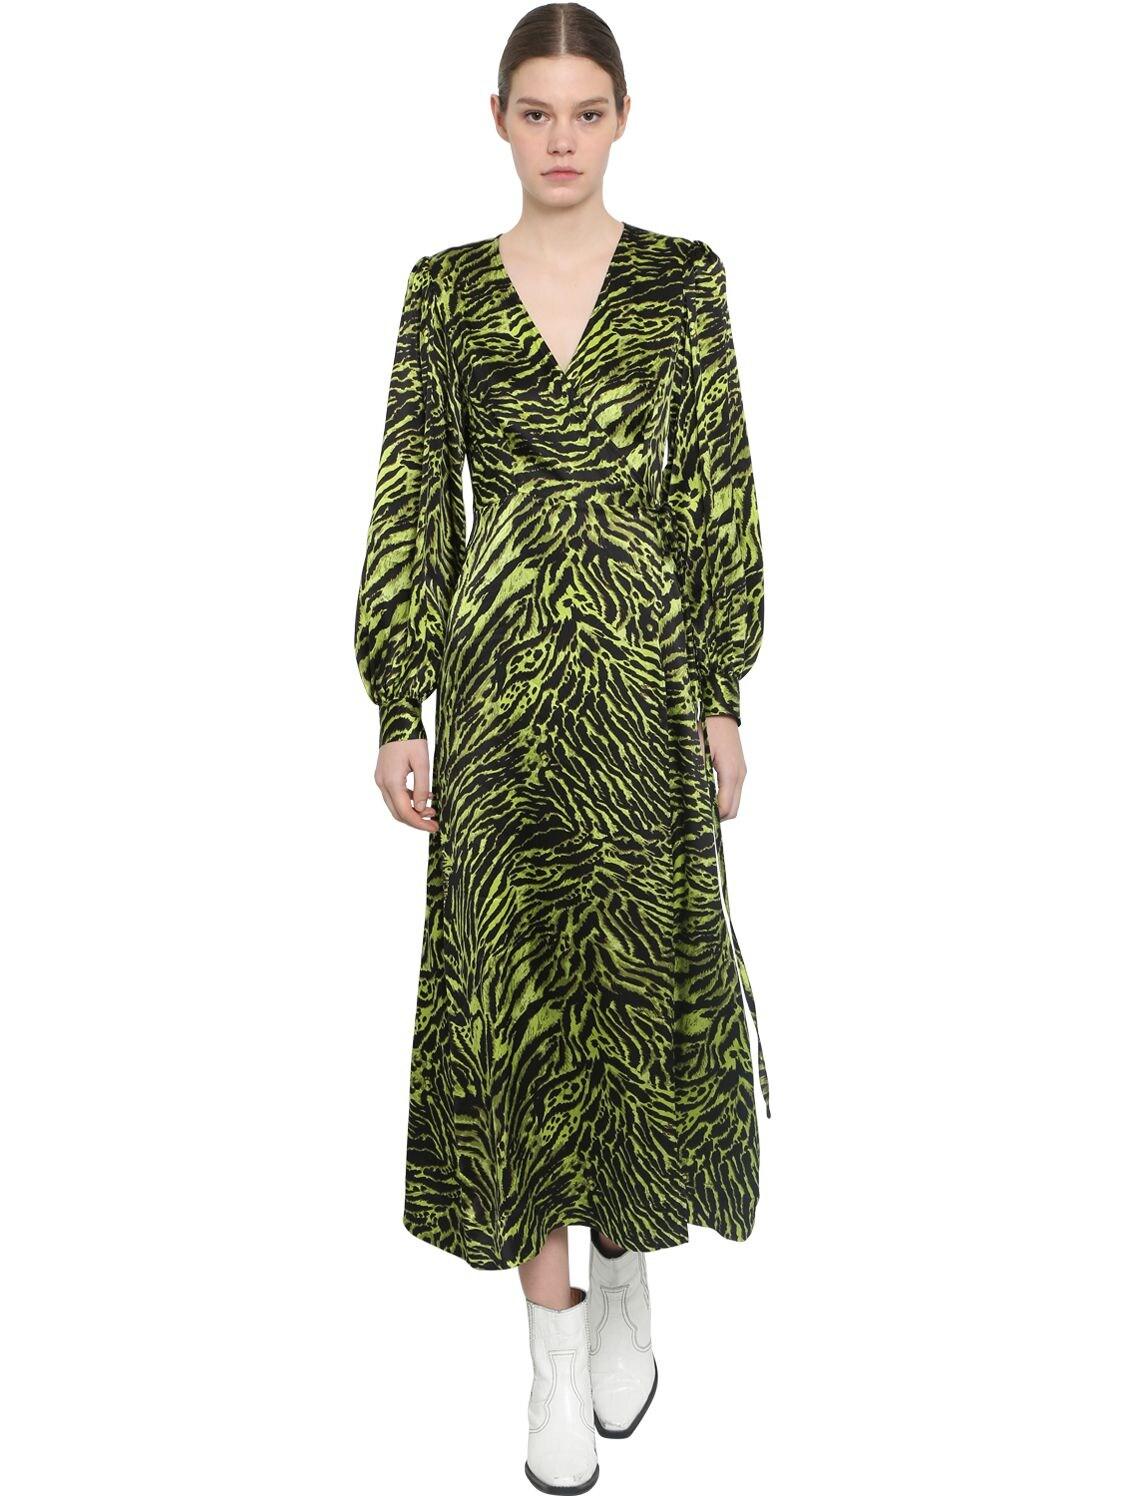 Ganni Silk Patterned Dress With Long Sleeves in Lime Tiger (Green ...